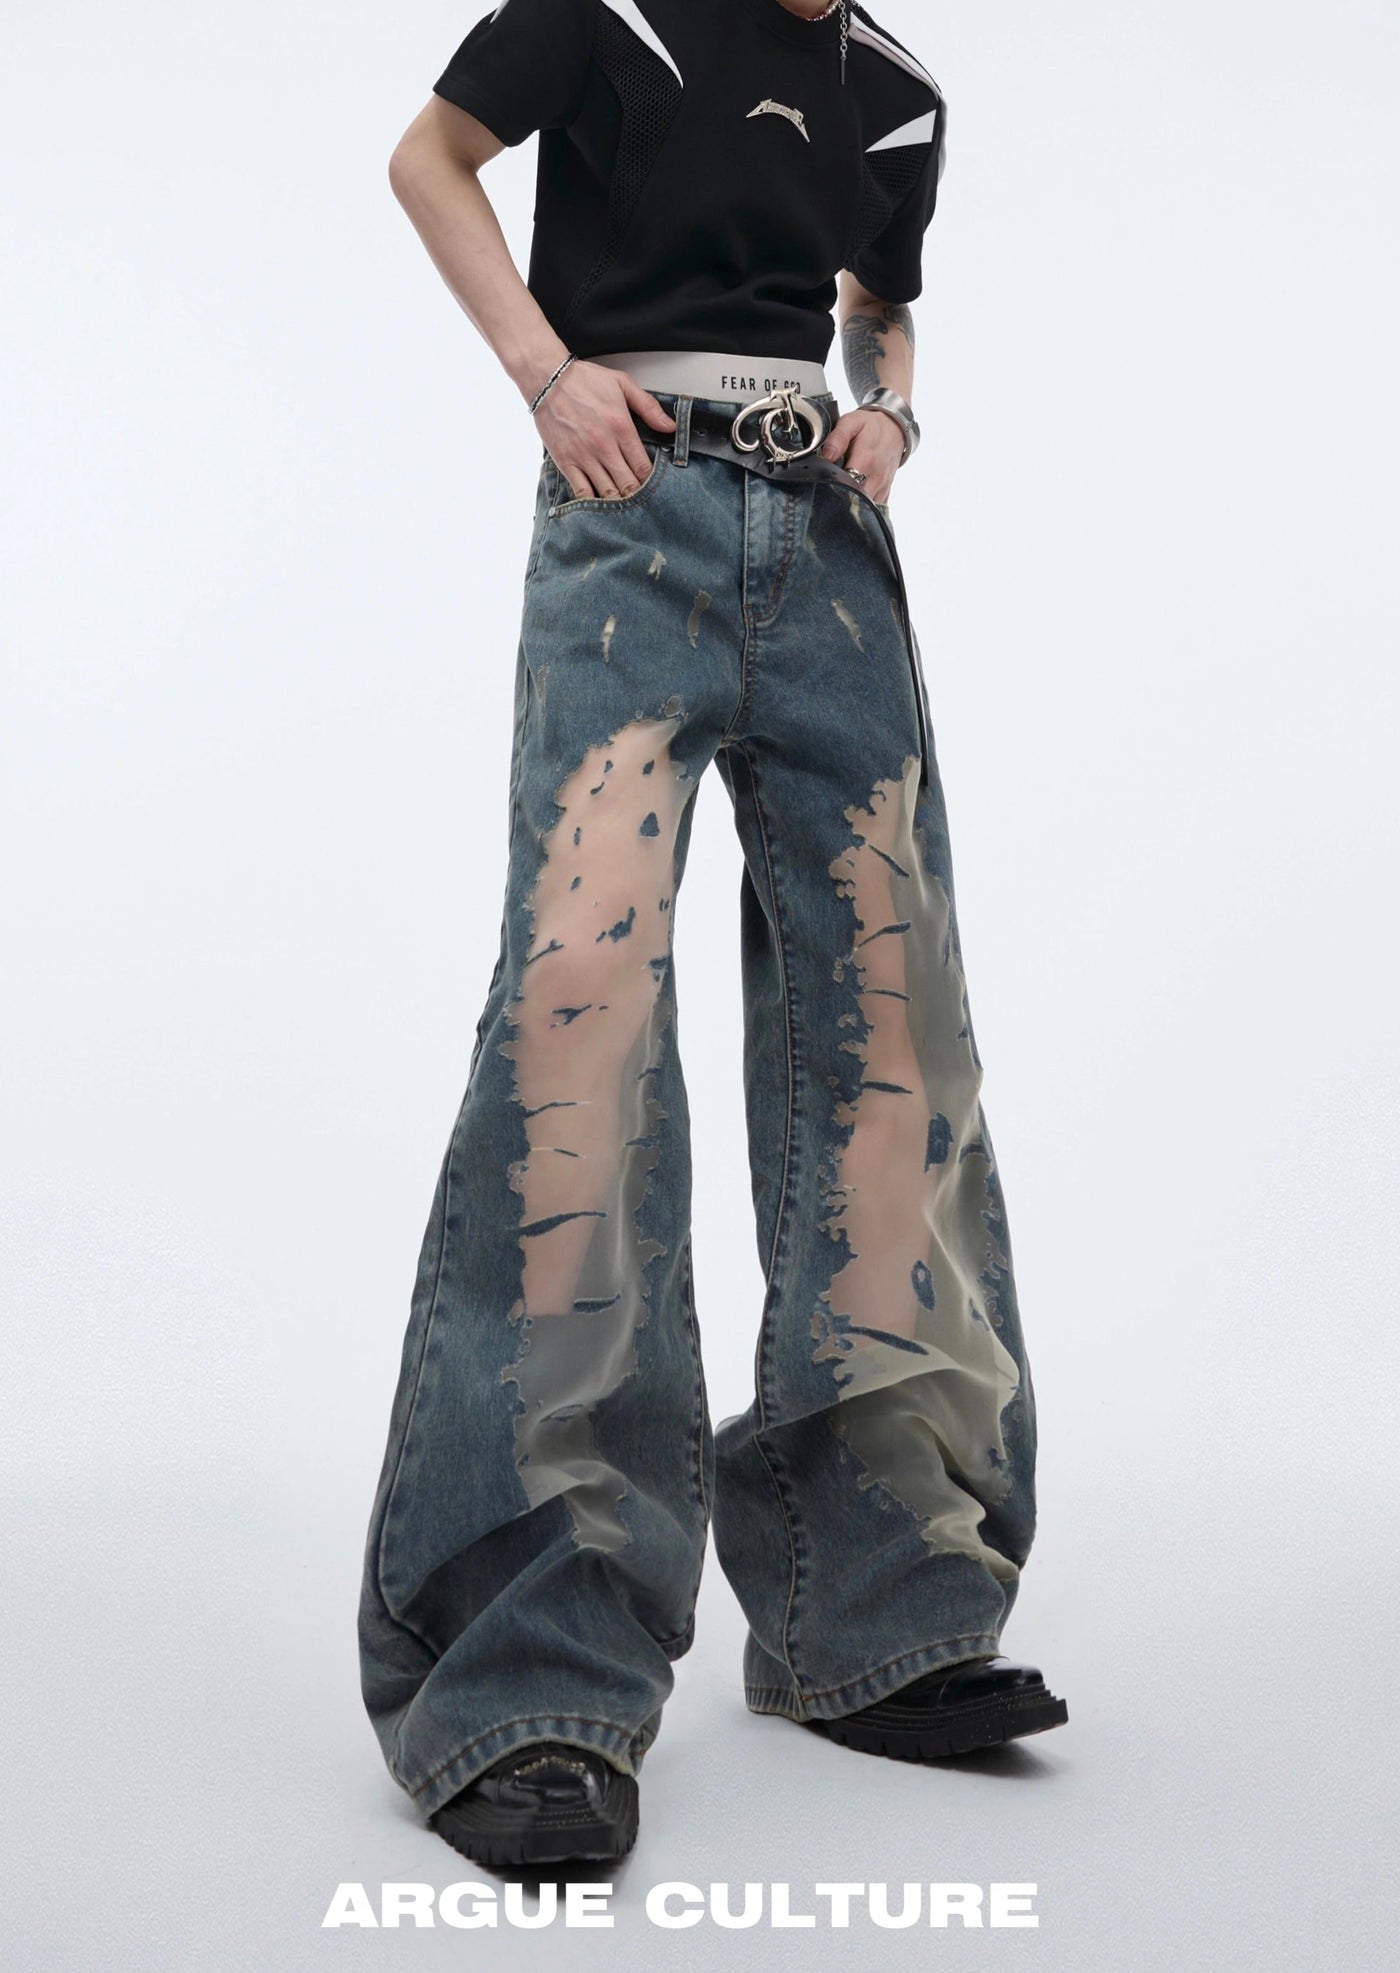 See Through Area Jeans Korean Street Fashion Jeans By Argue Culture Shop Online at OH Vault